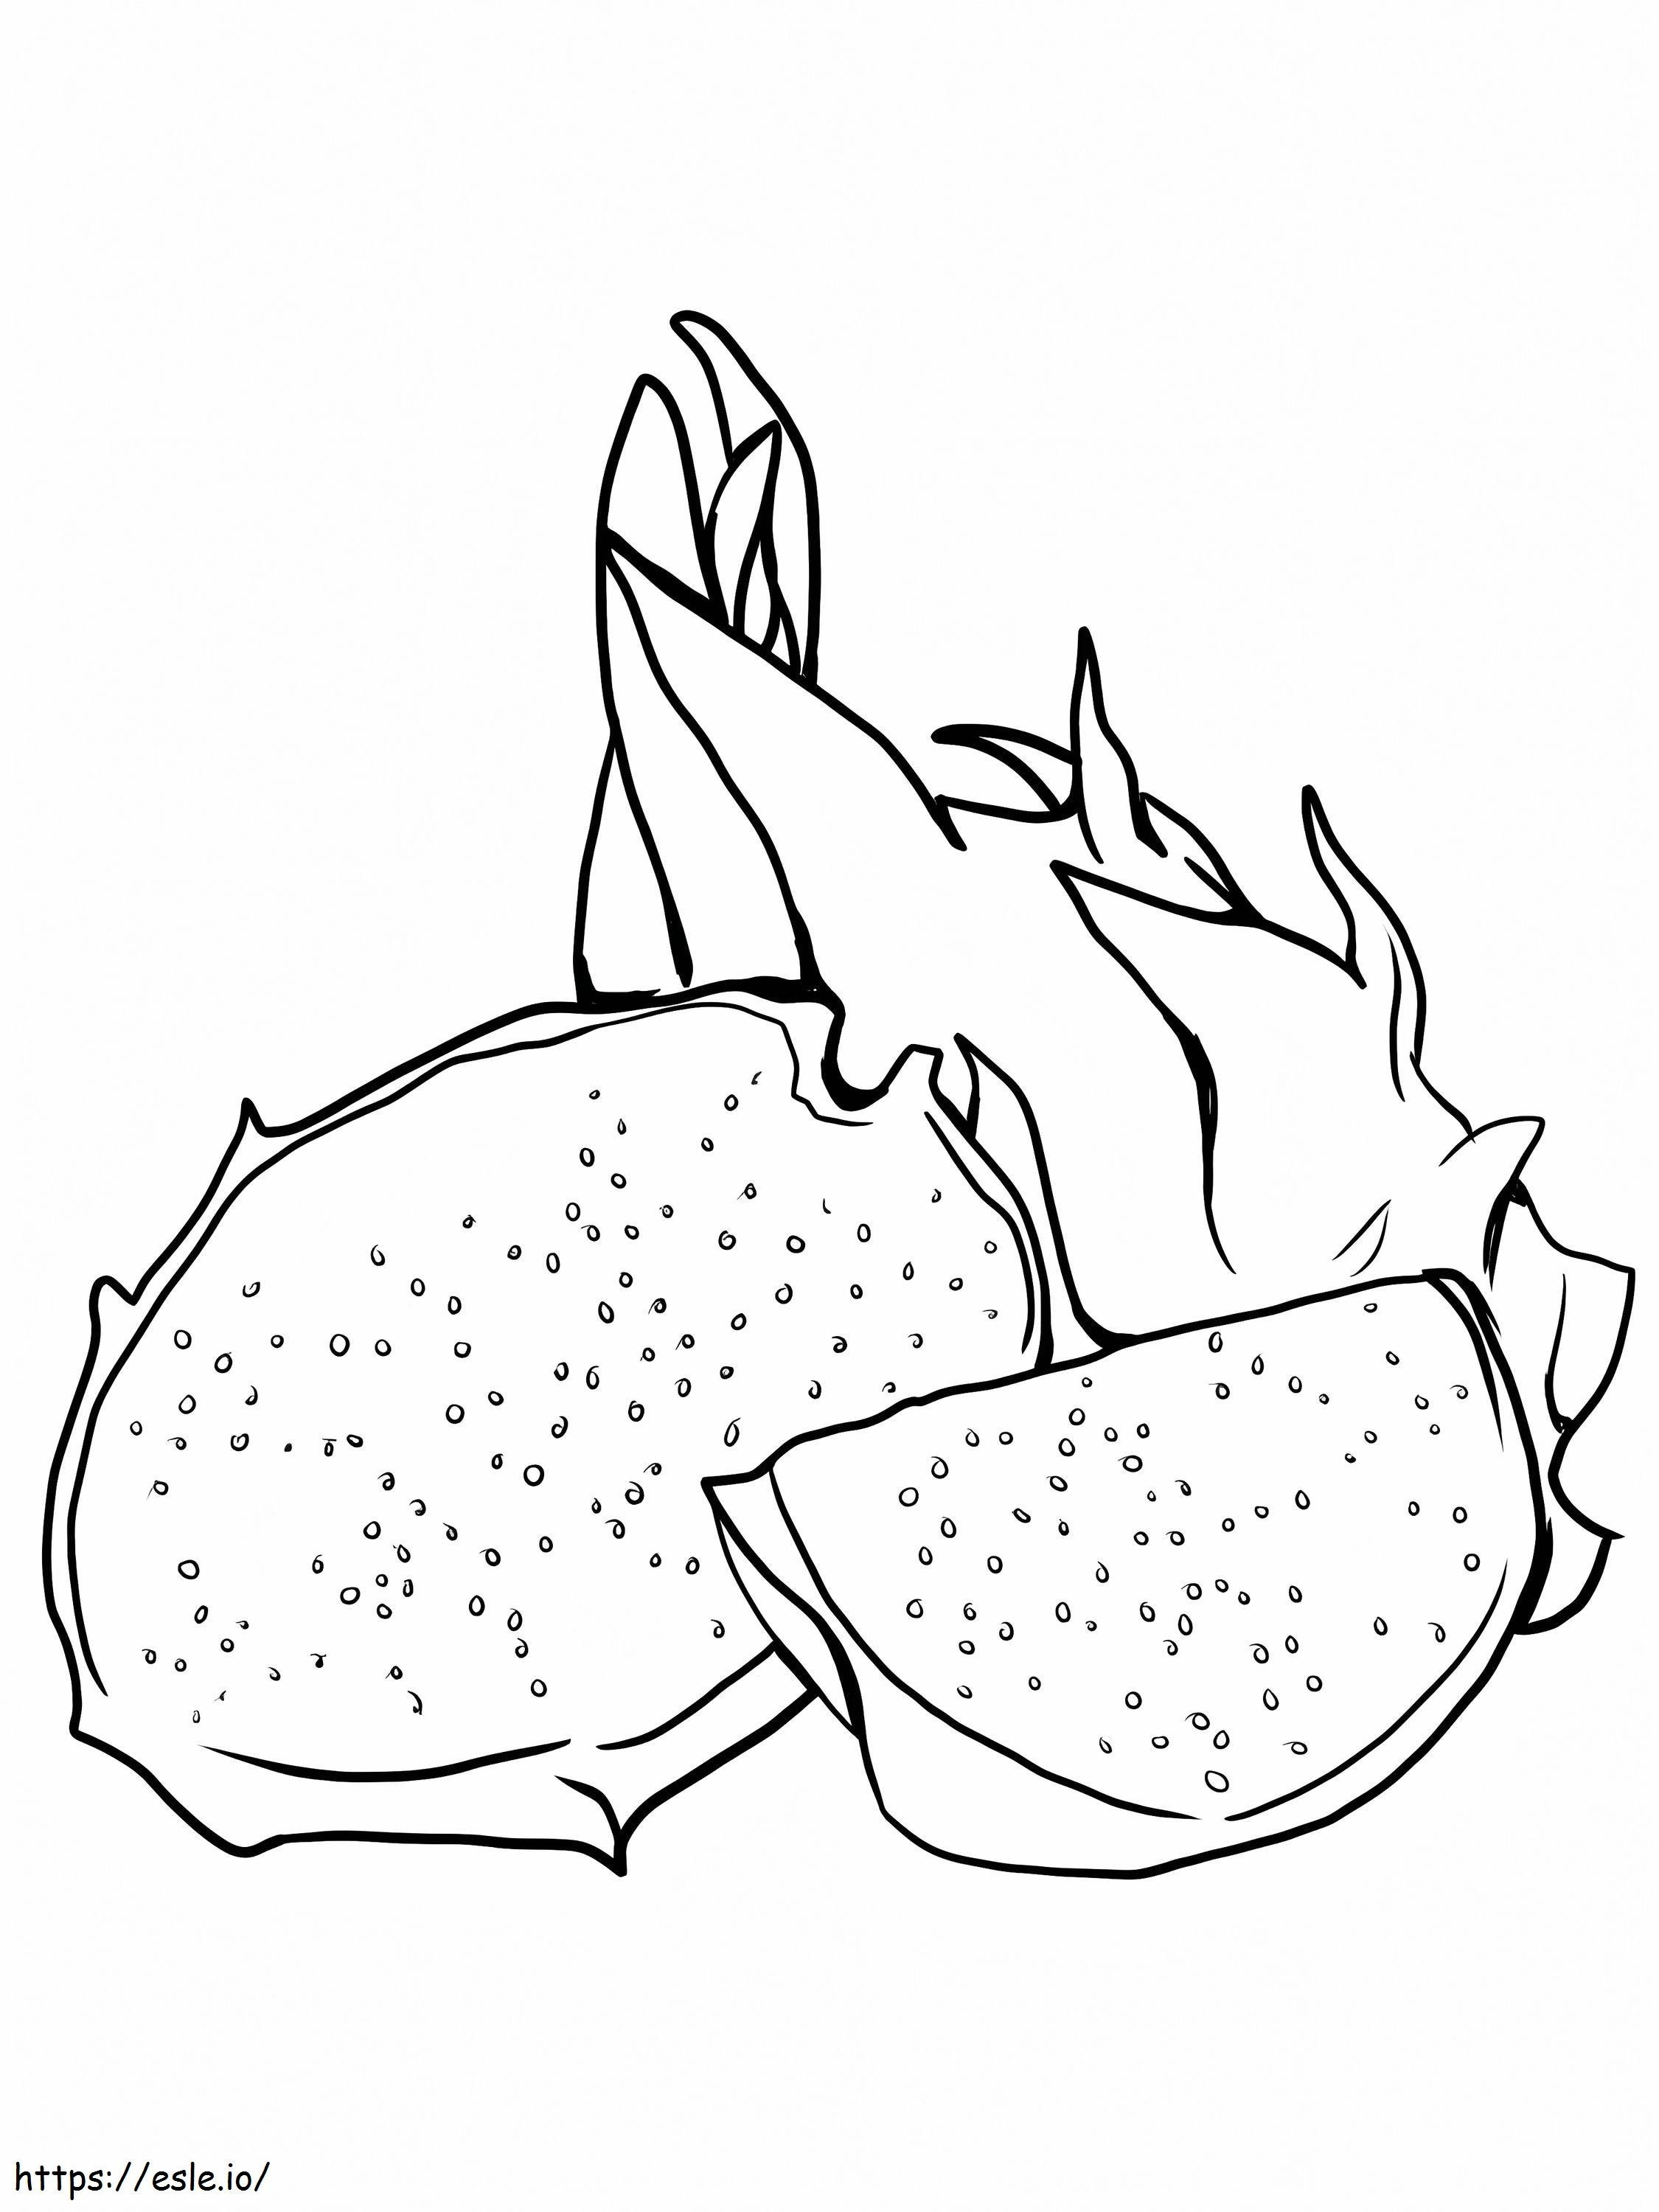 Dragon Fruit 1 coloring page